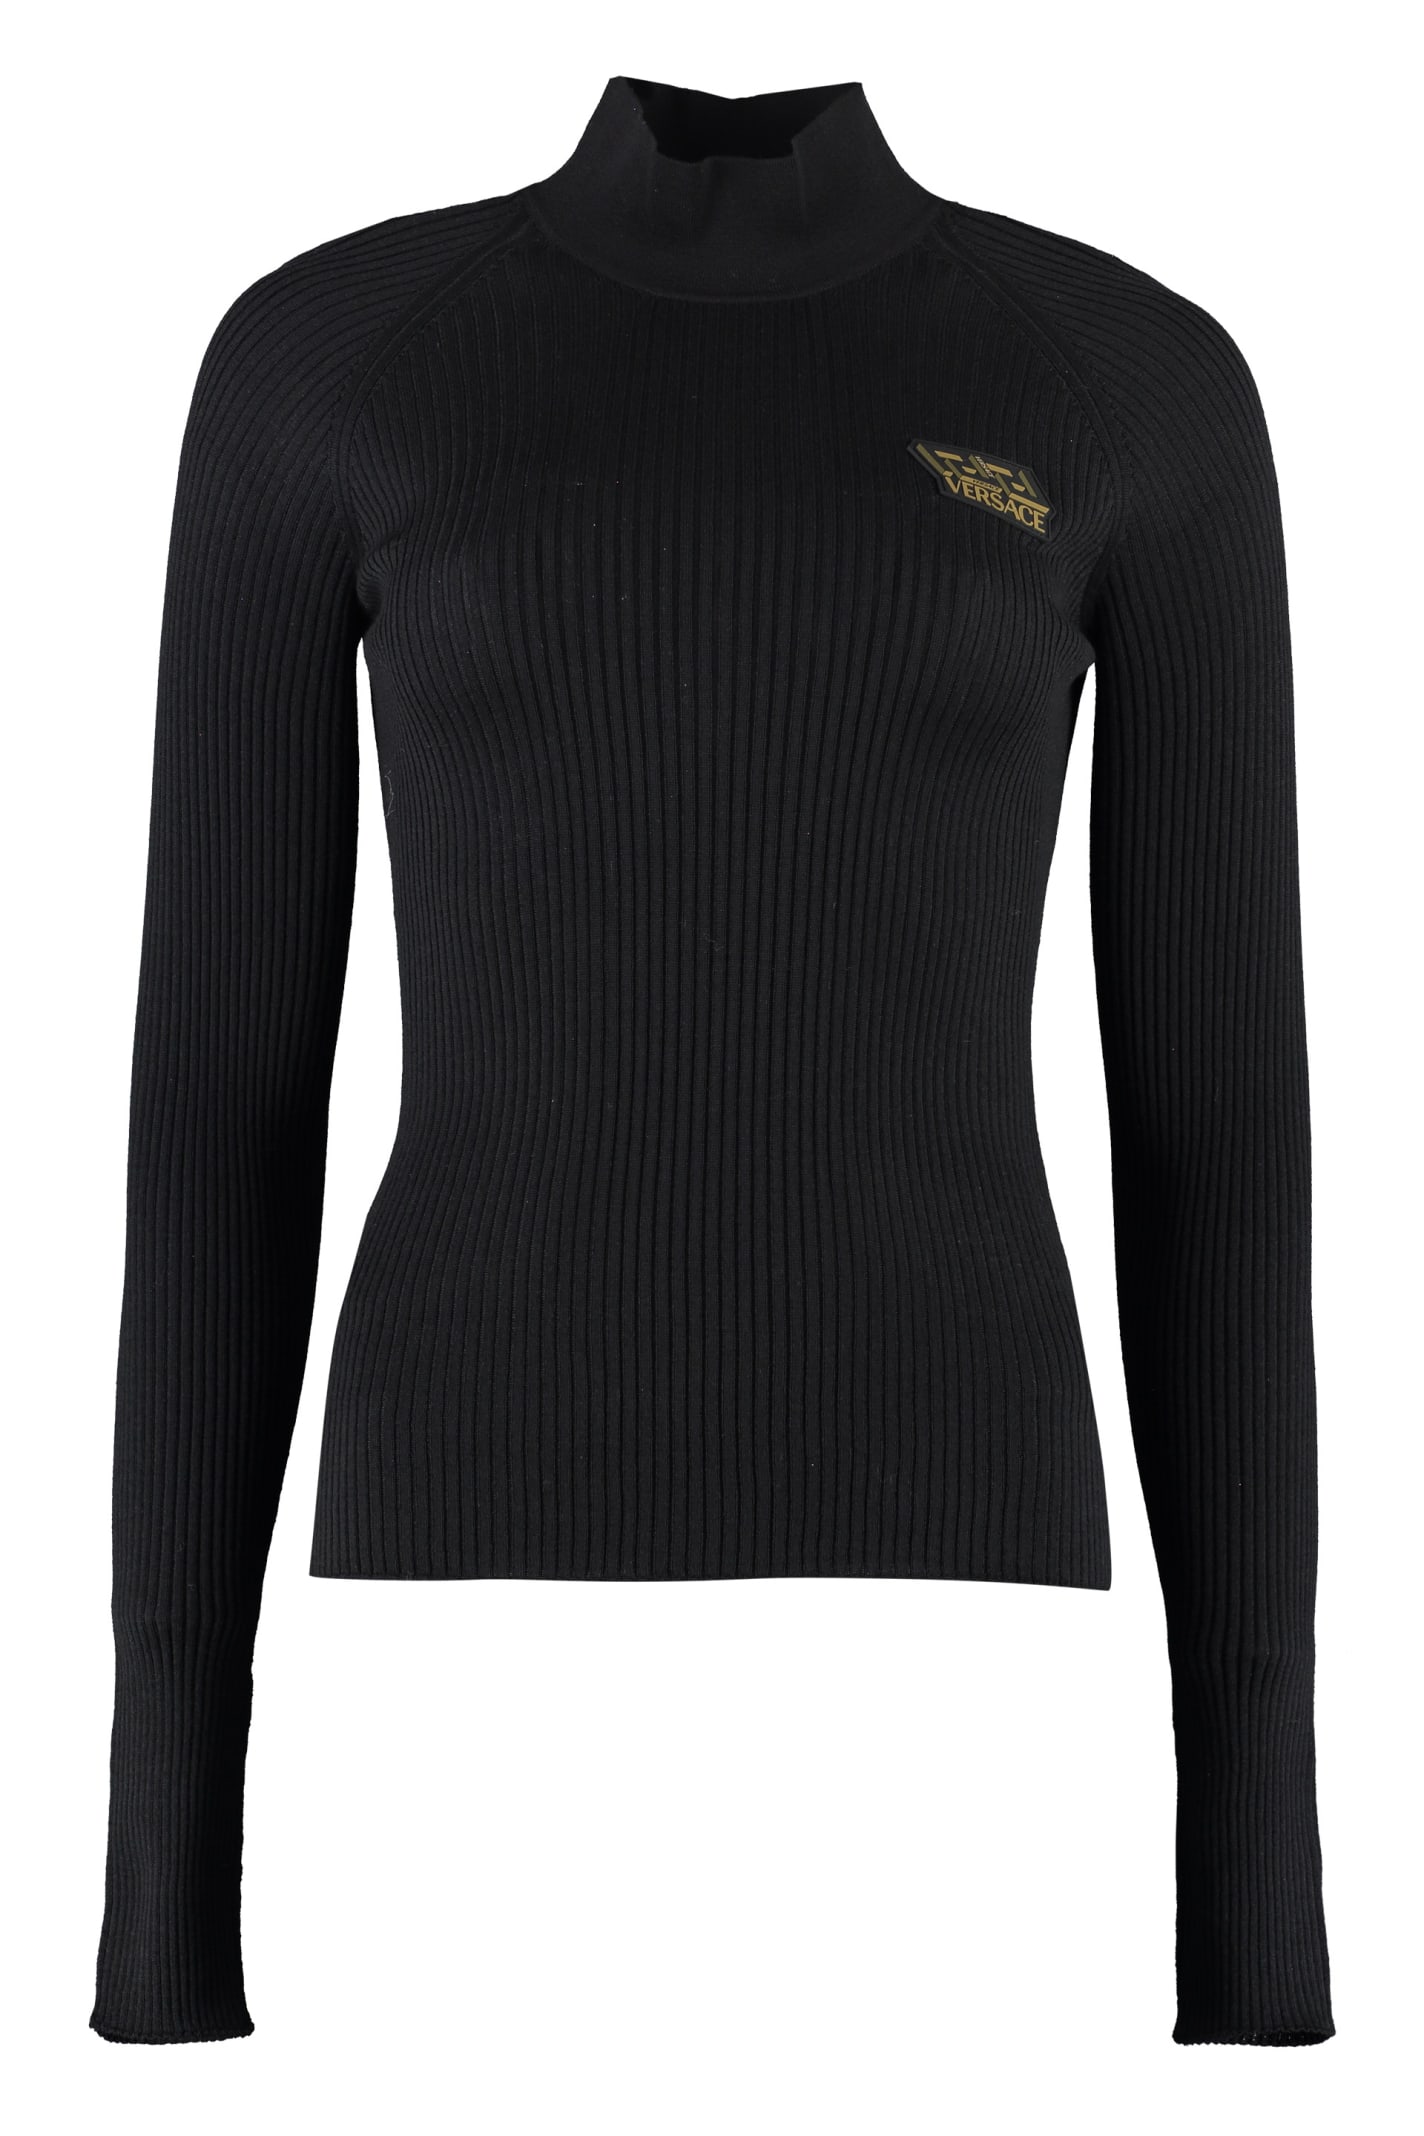 Versace Ribbed Sweater